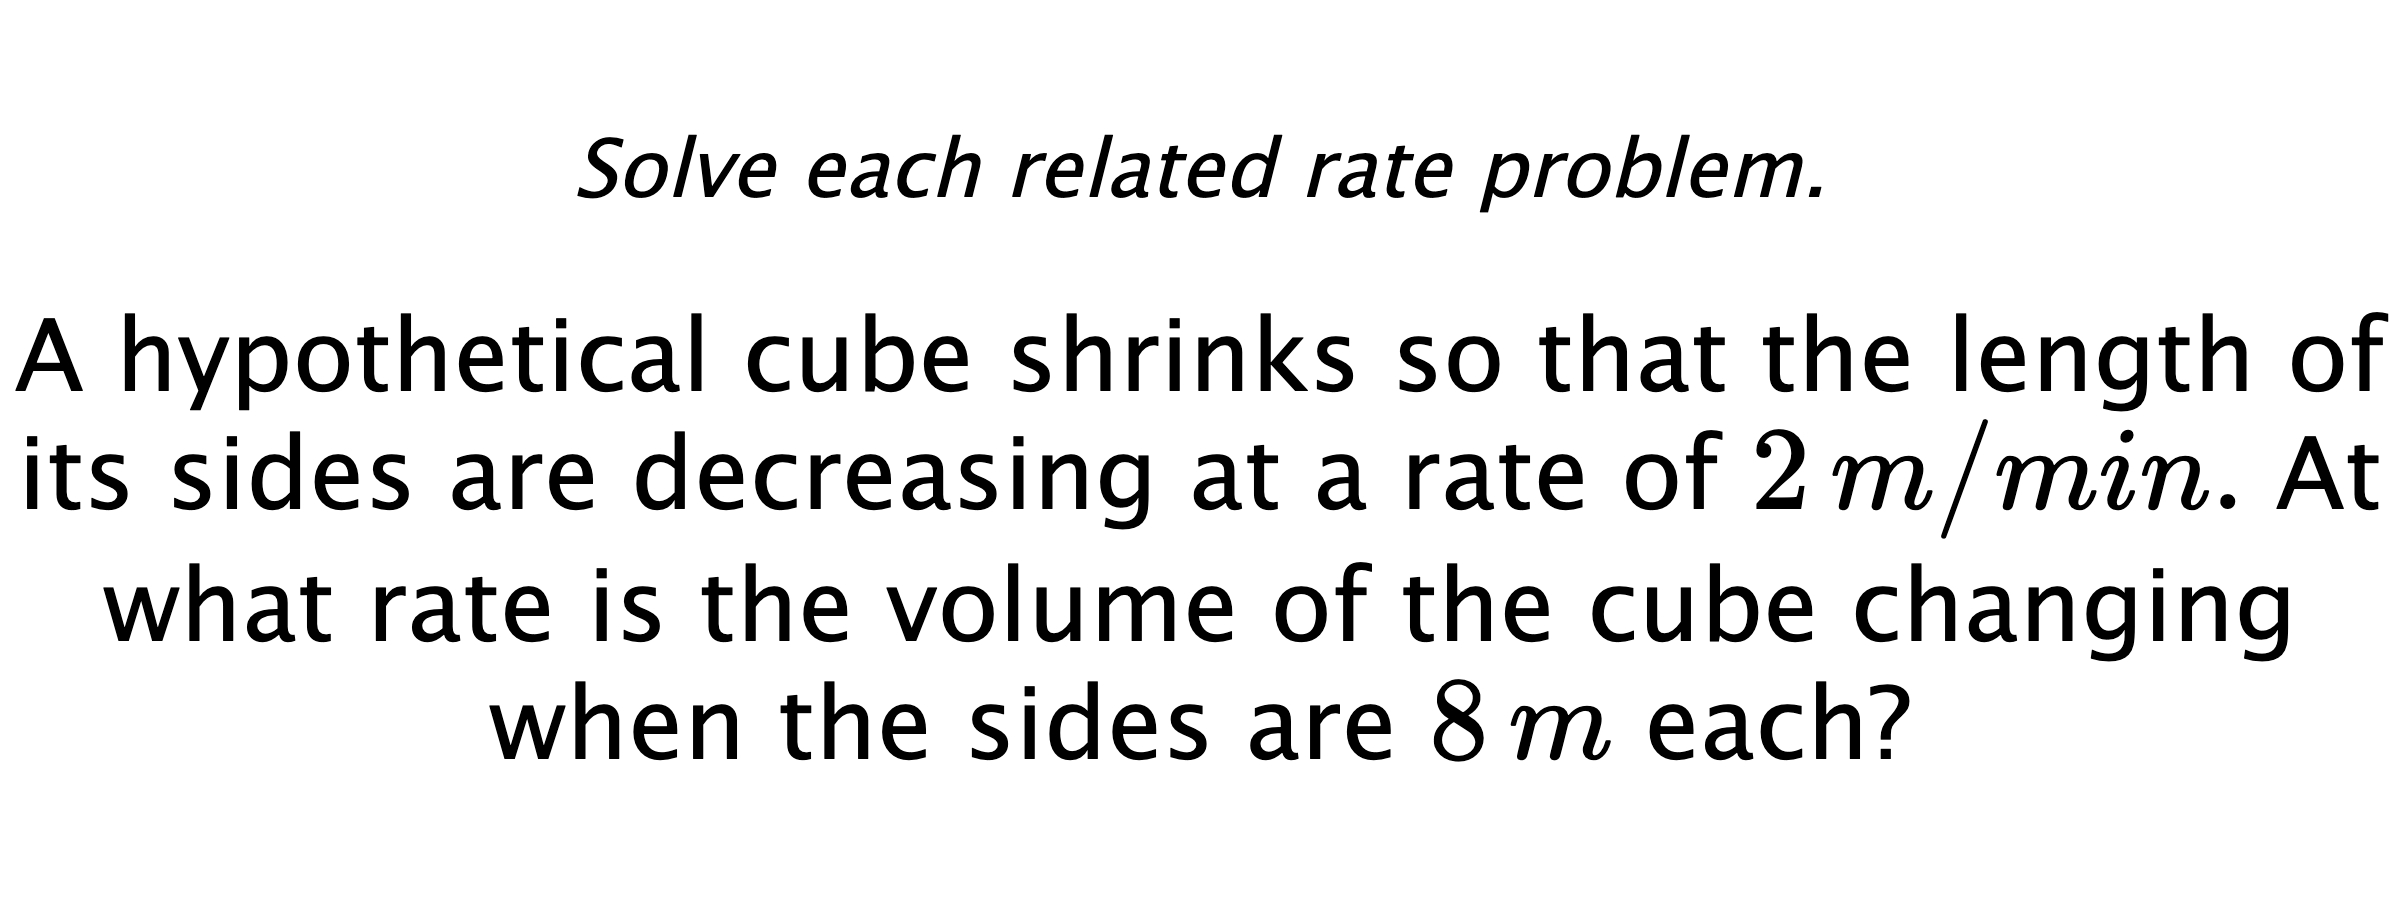 Solve each related rate problem. A hypothetical cube shrinks so that the length of its sides are decreasing at a rate of $2\,m/min.$ At what rate is the volume of the cube changing when the sides are $8\,m$ each?